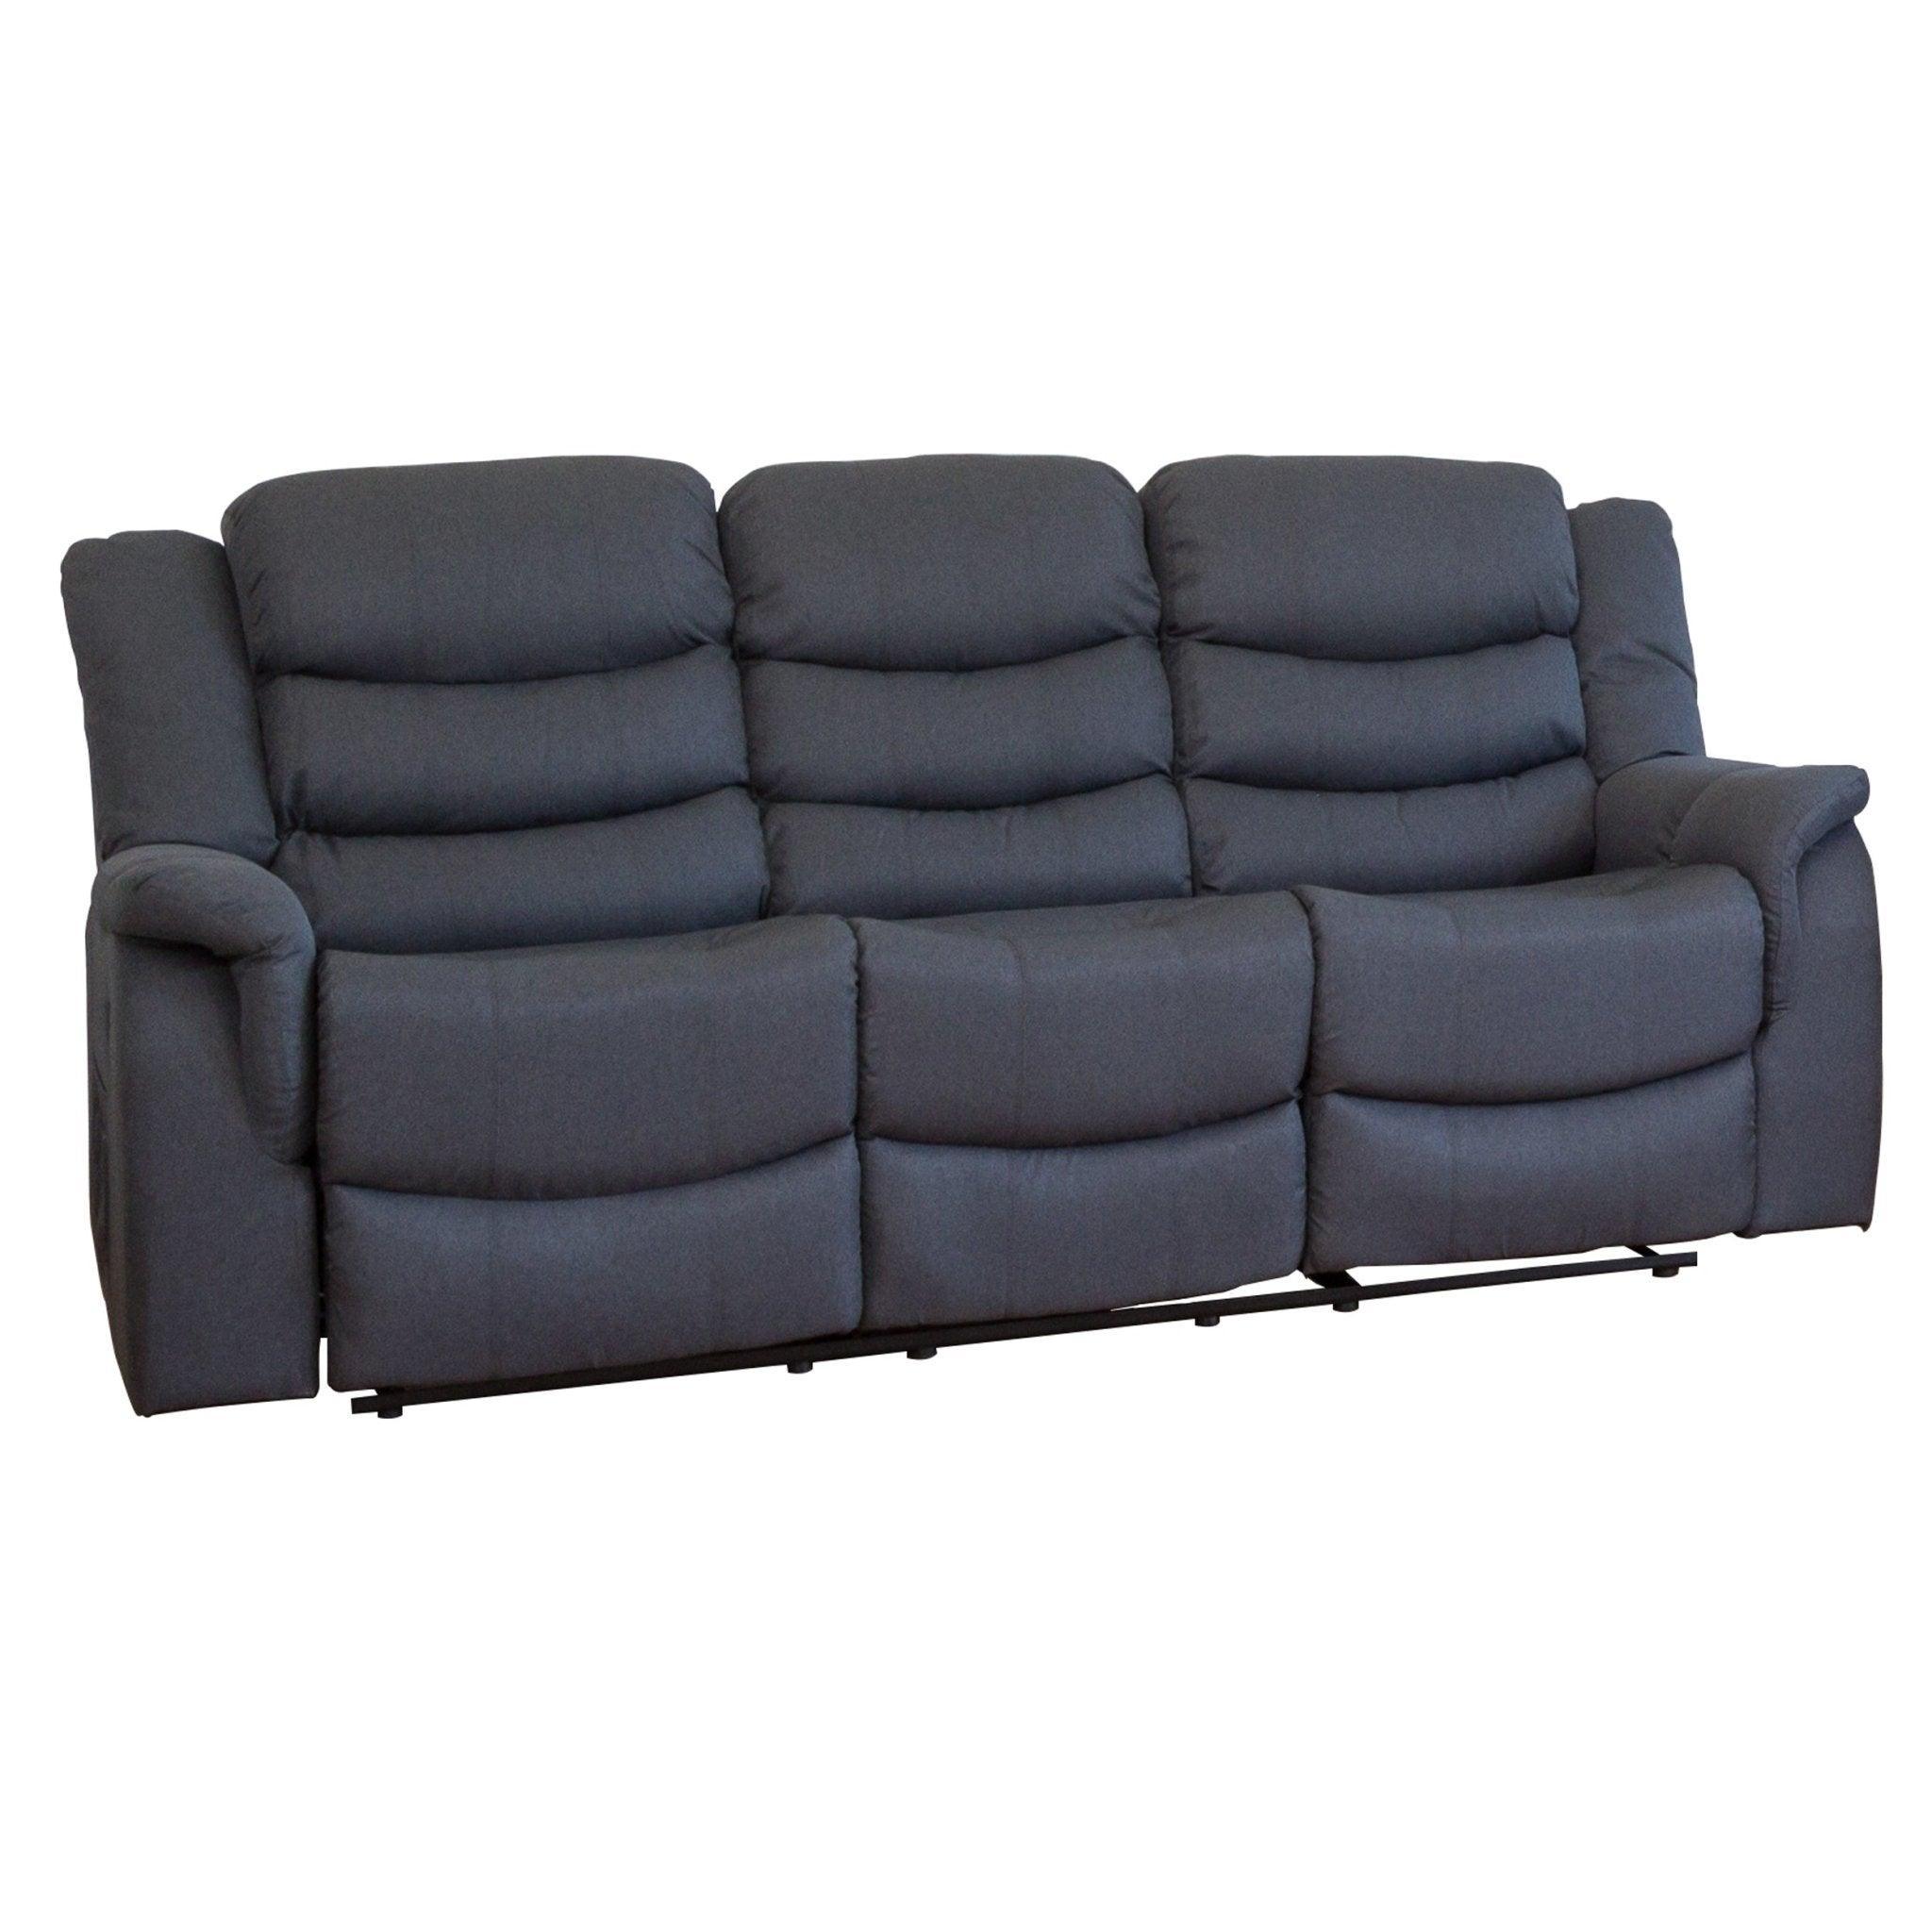 Aimee Fabric Recliner Sofa Collection - loveyourbed.co.uk